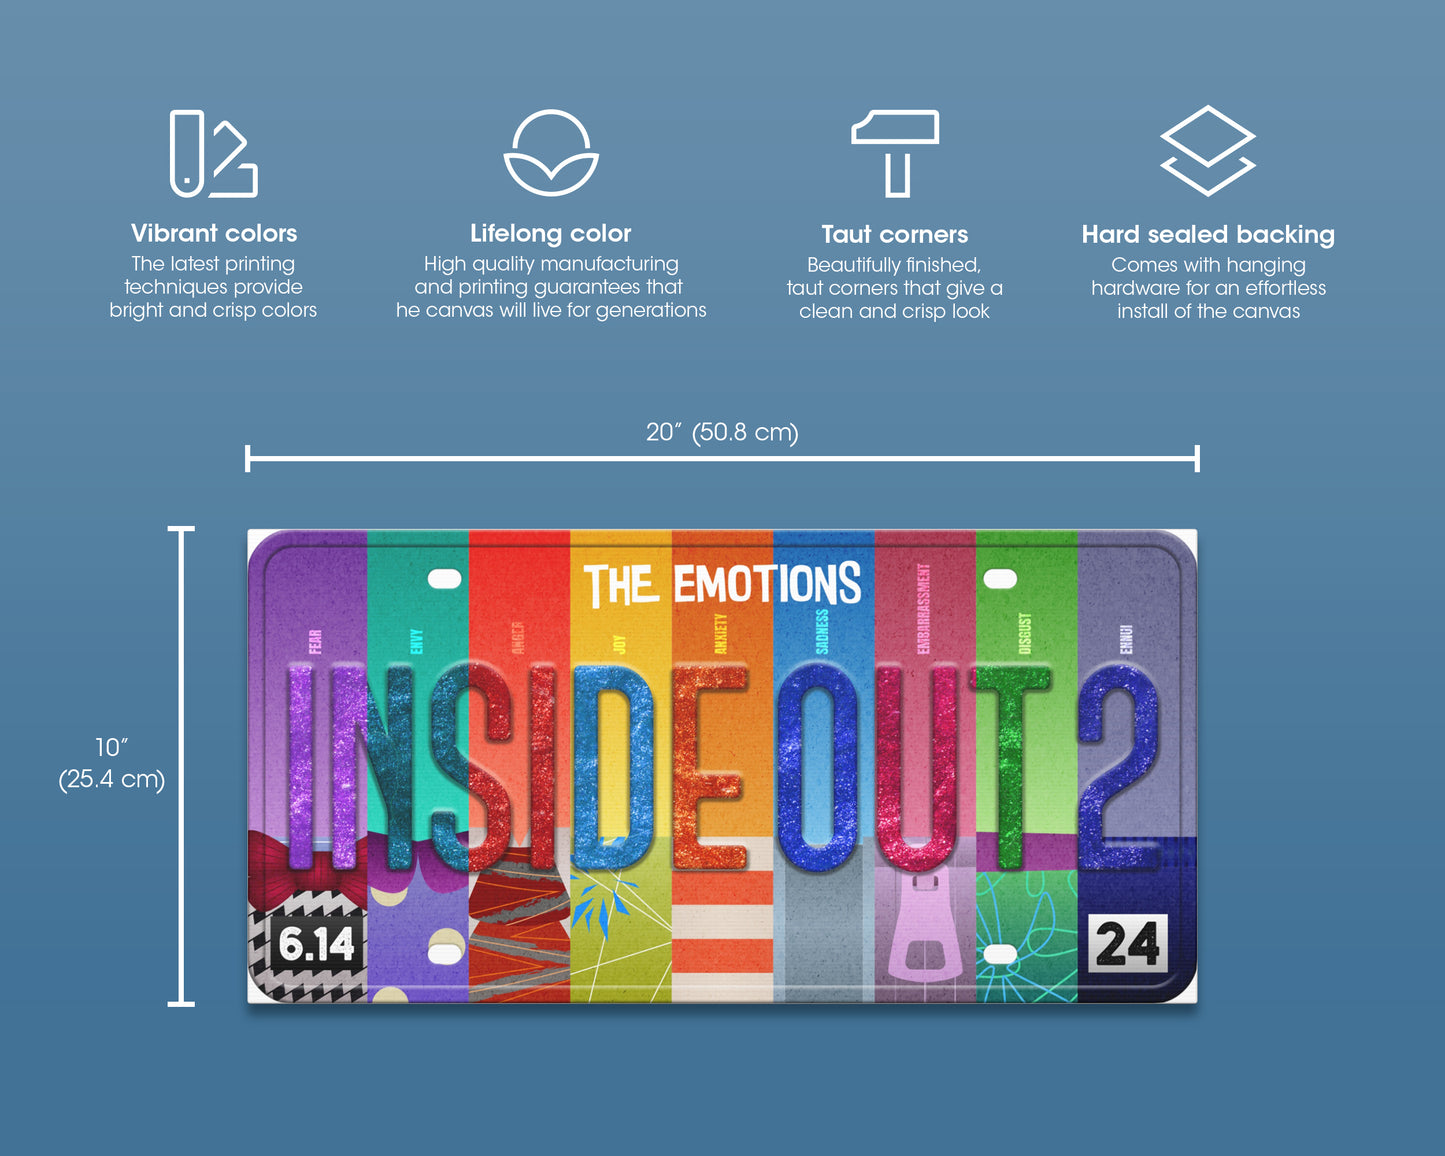 InsideOut 2 (2024) movie canvas wall decor